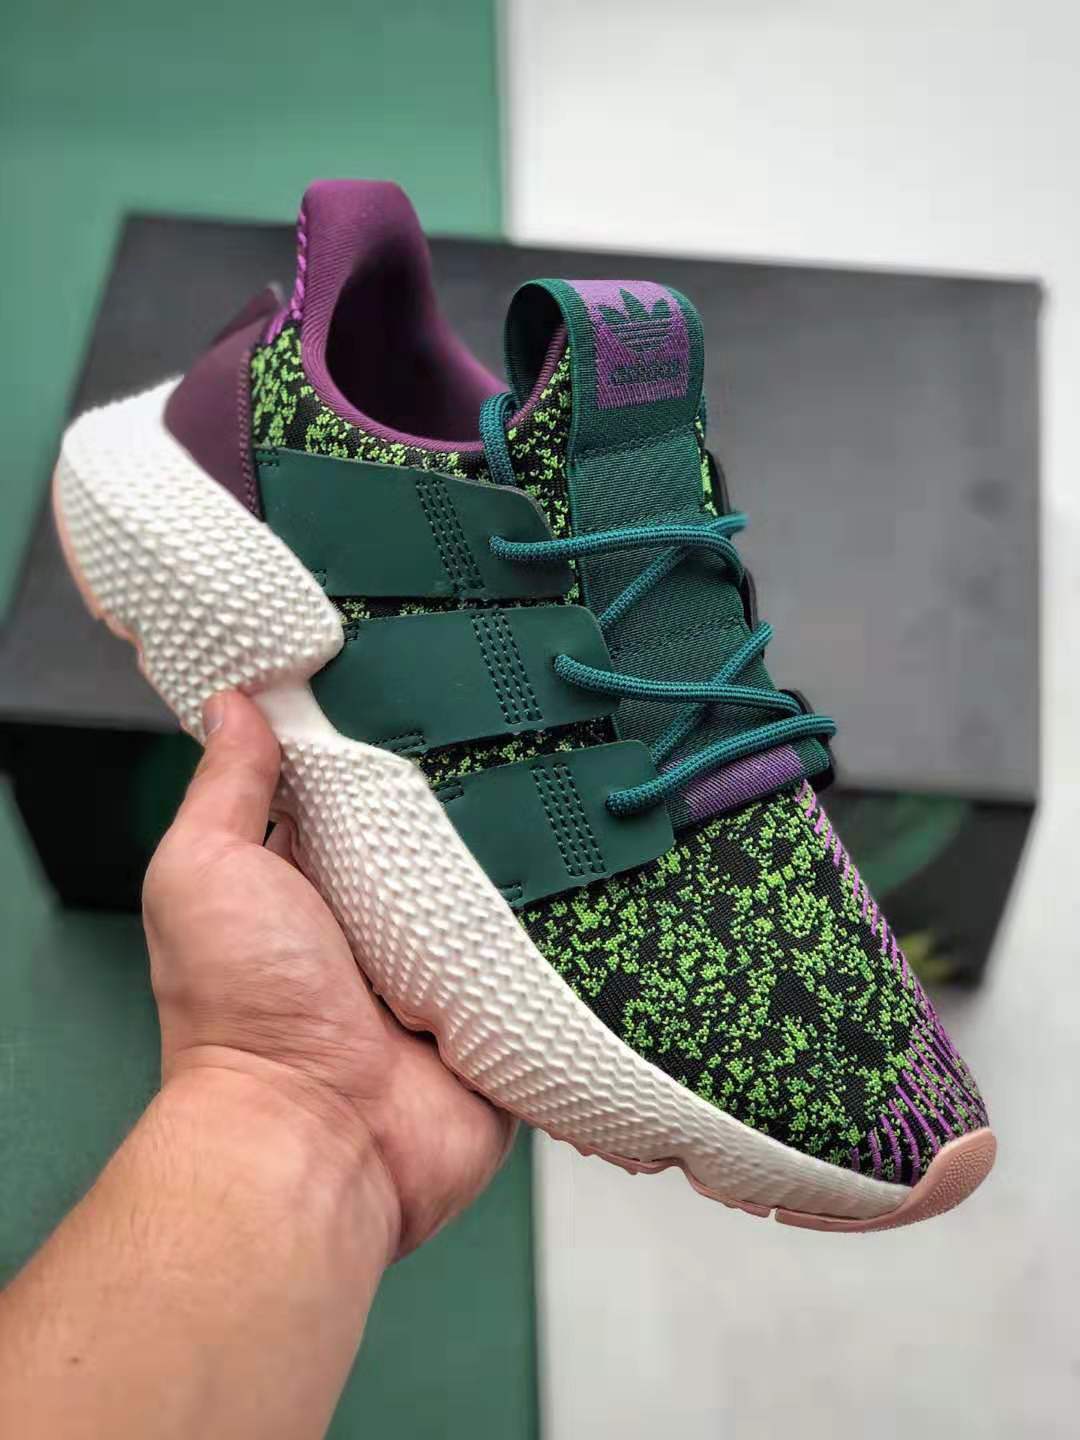 Adidas Dragon Ball Z x Prophere 'Cell' D97053 - Limited Edition Collaboration with Iconic Anime Series